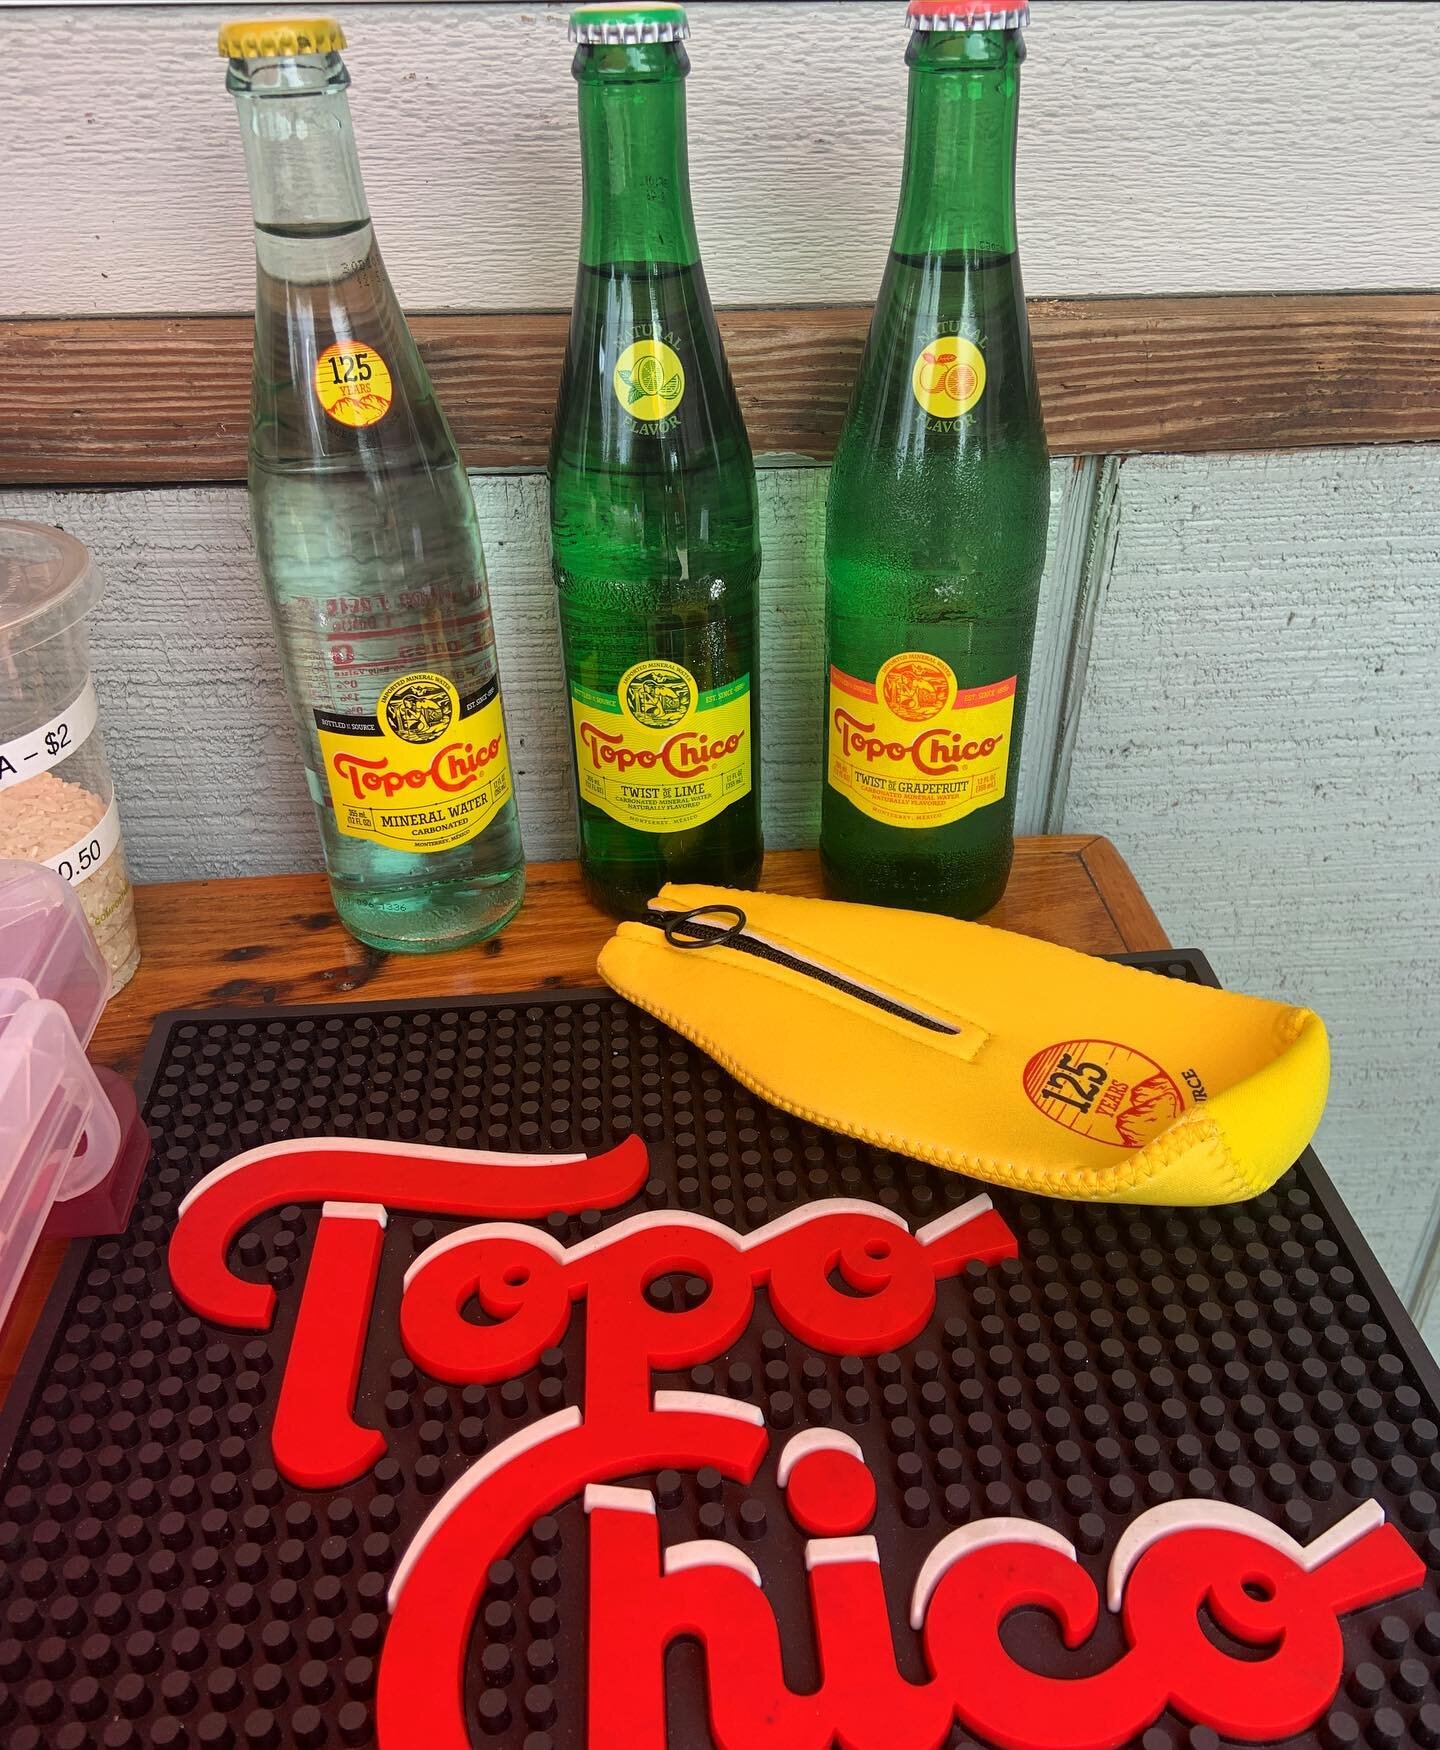 FREE COOZIE for the first 3 people to get a Topo Chico!! Get &lsquo;em while they last! 
#topochico #avleats #blackmountain #farmtotable #cleaneating #freshfood